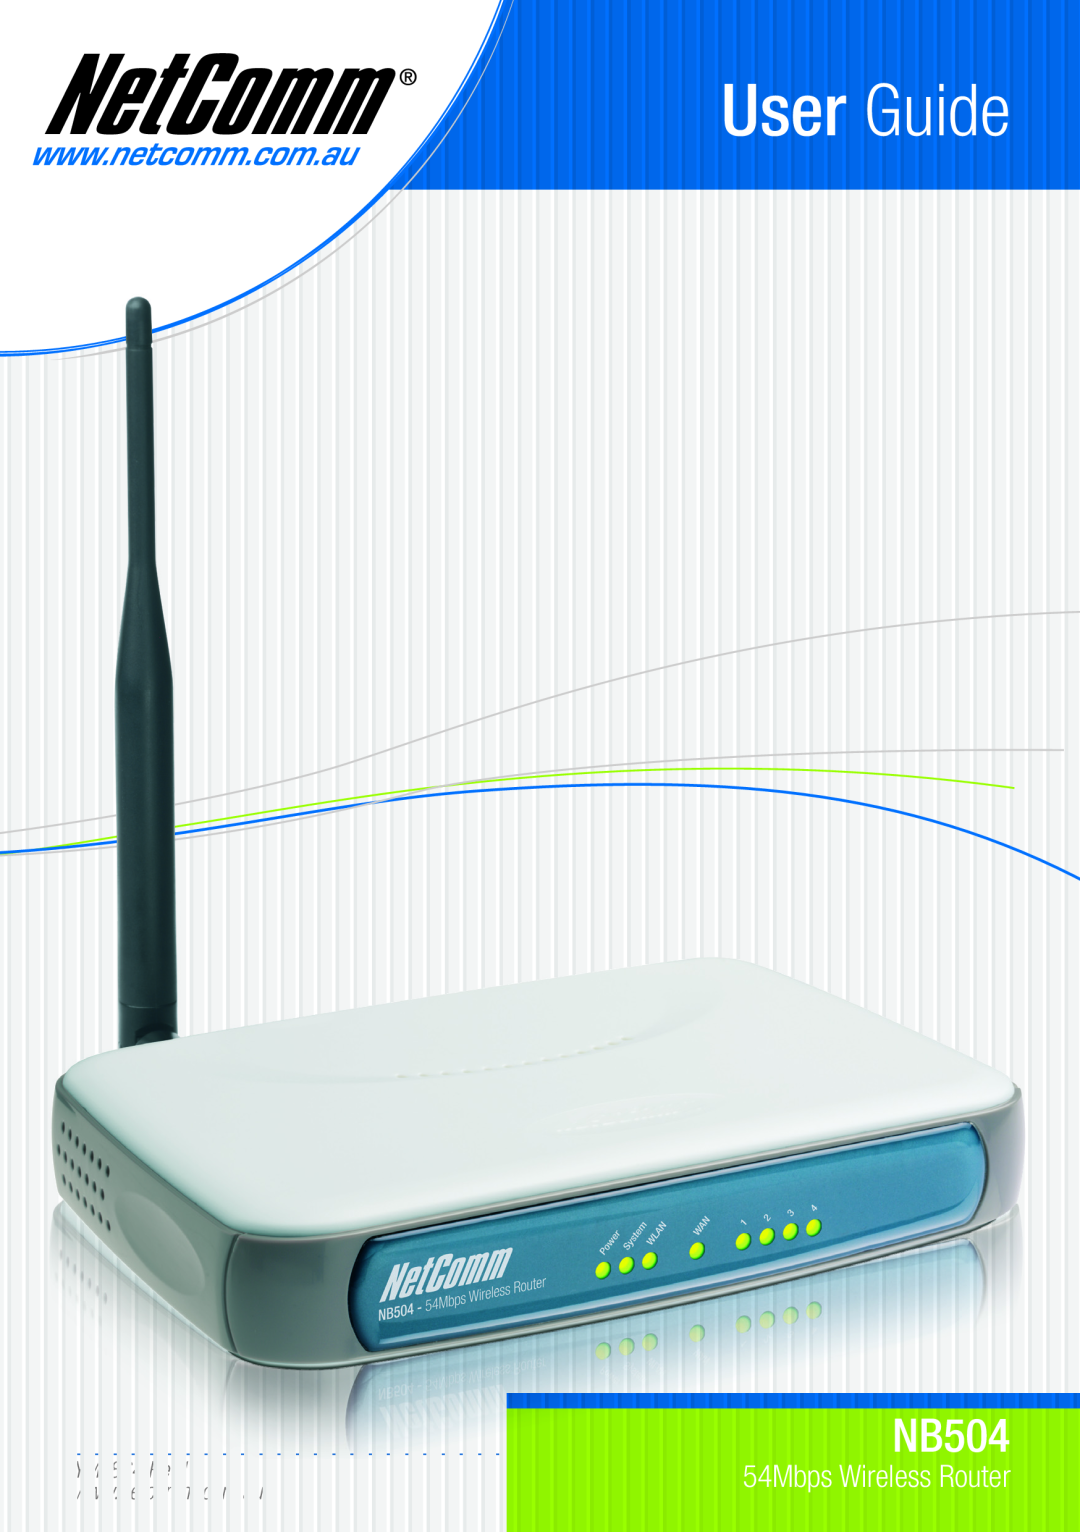 NetComm NB504 manual YML864 Rev1, User Guide, 54Mbps Wireless Router, NB50 4 Us e r G id 